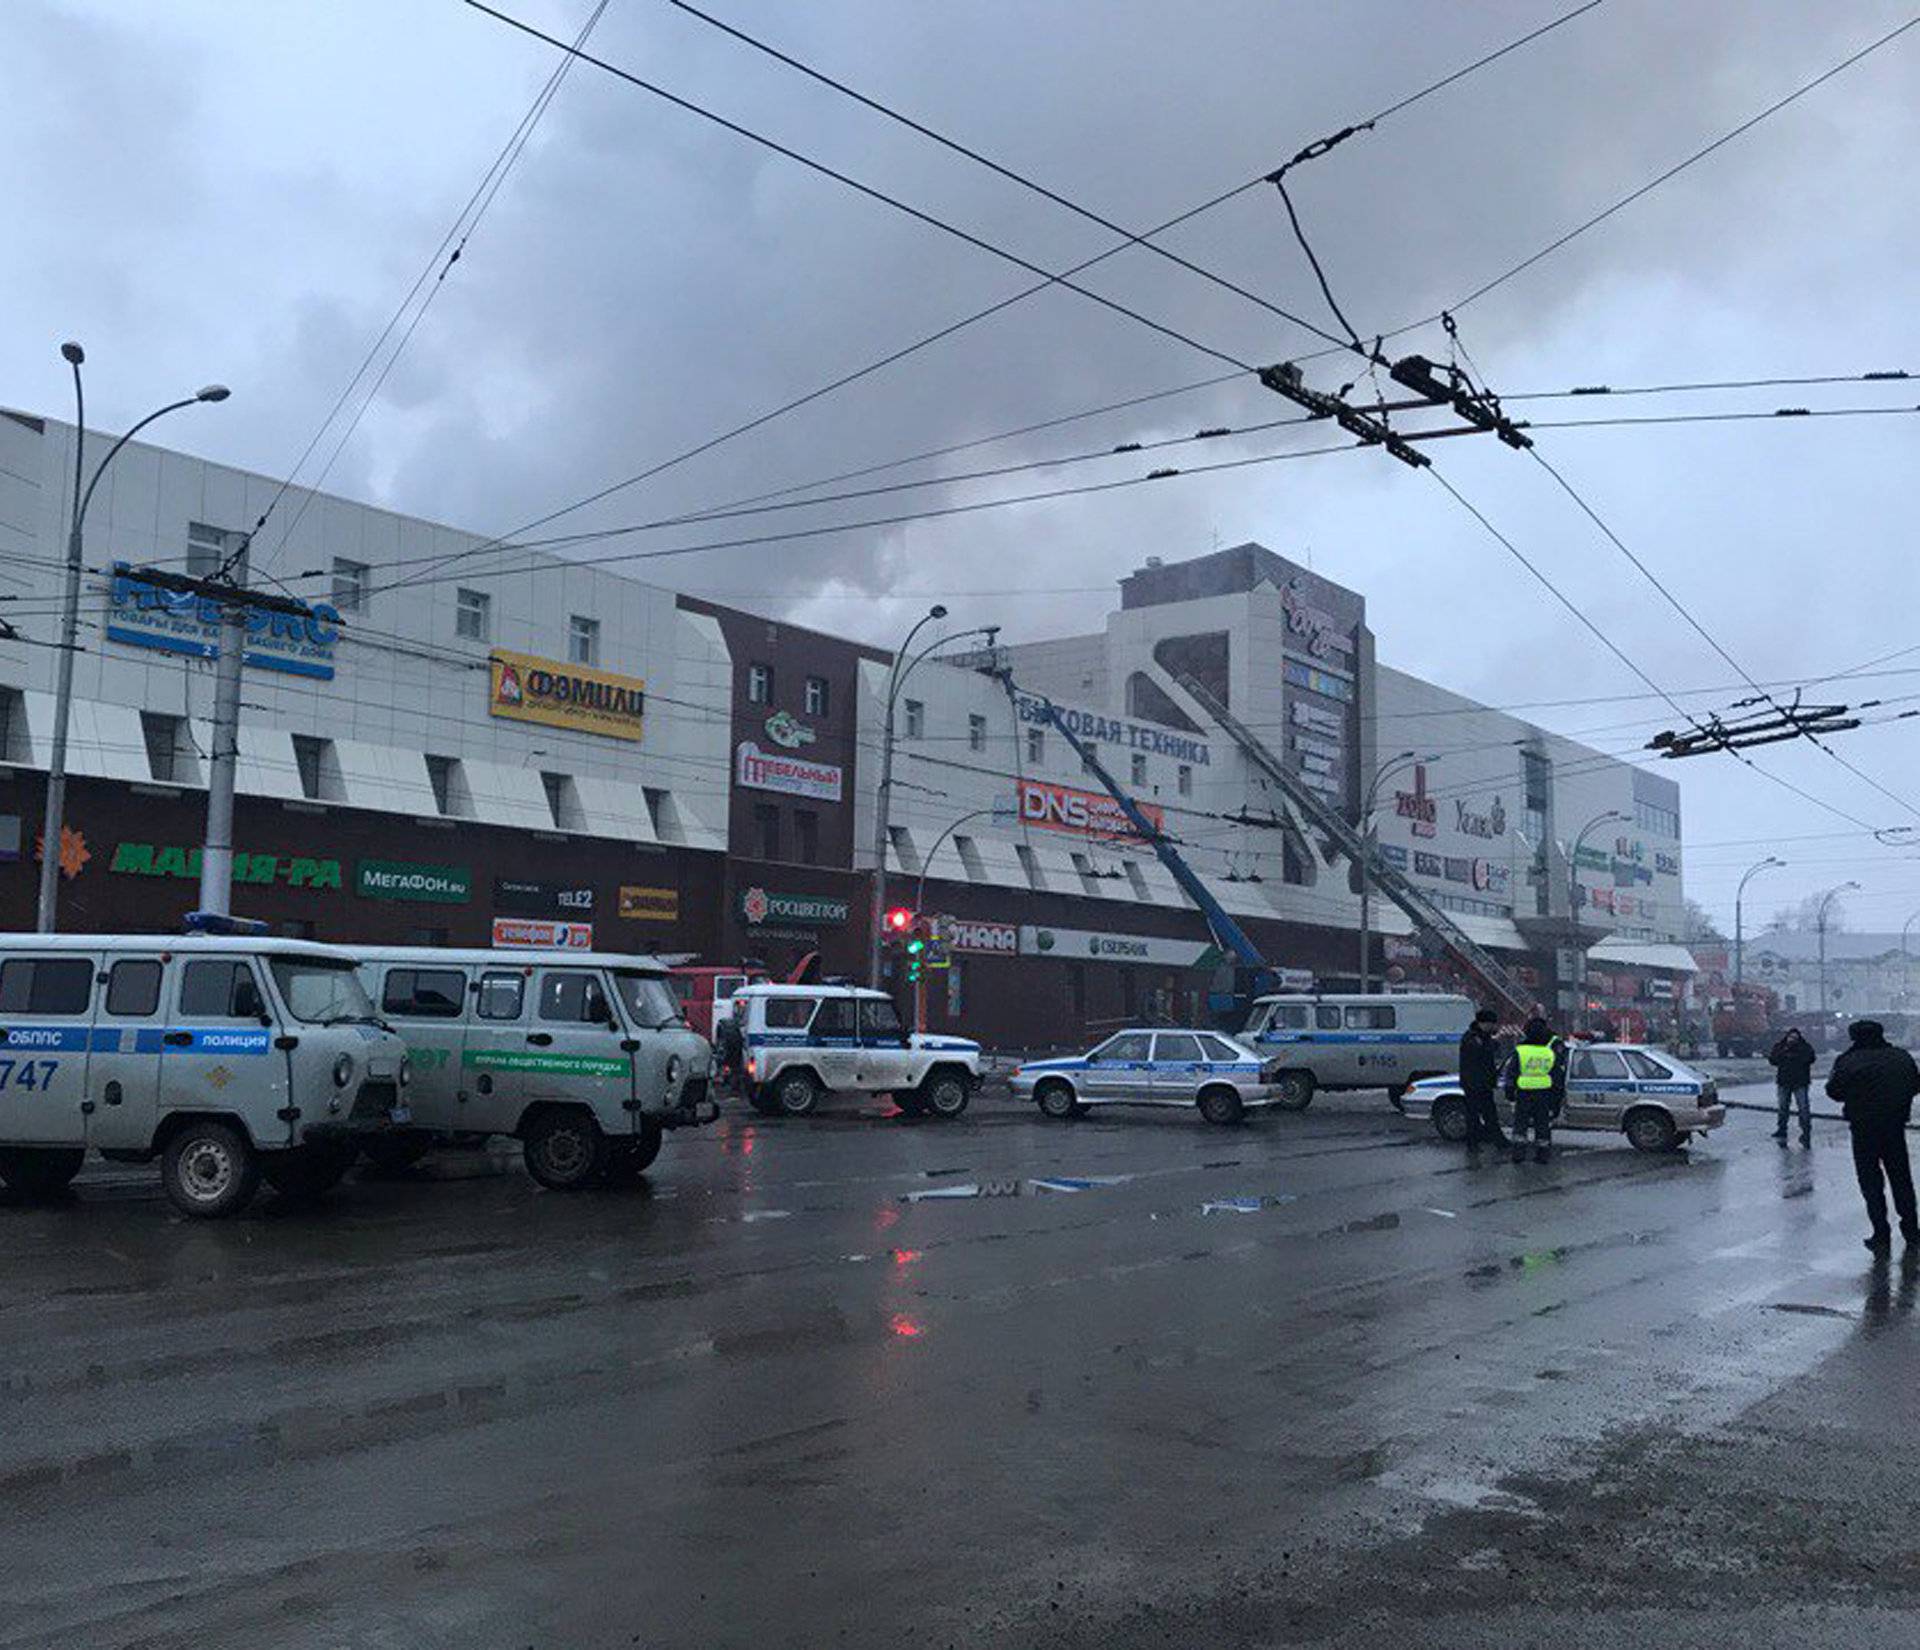 Rescue personnel is seen on a site of fire at a shopping mall in Kemerovo